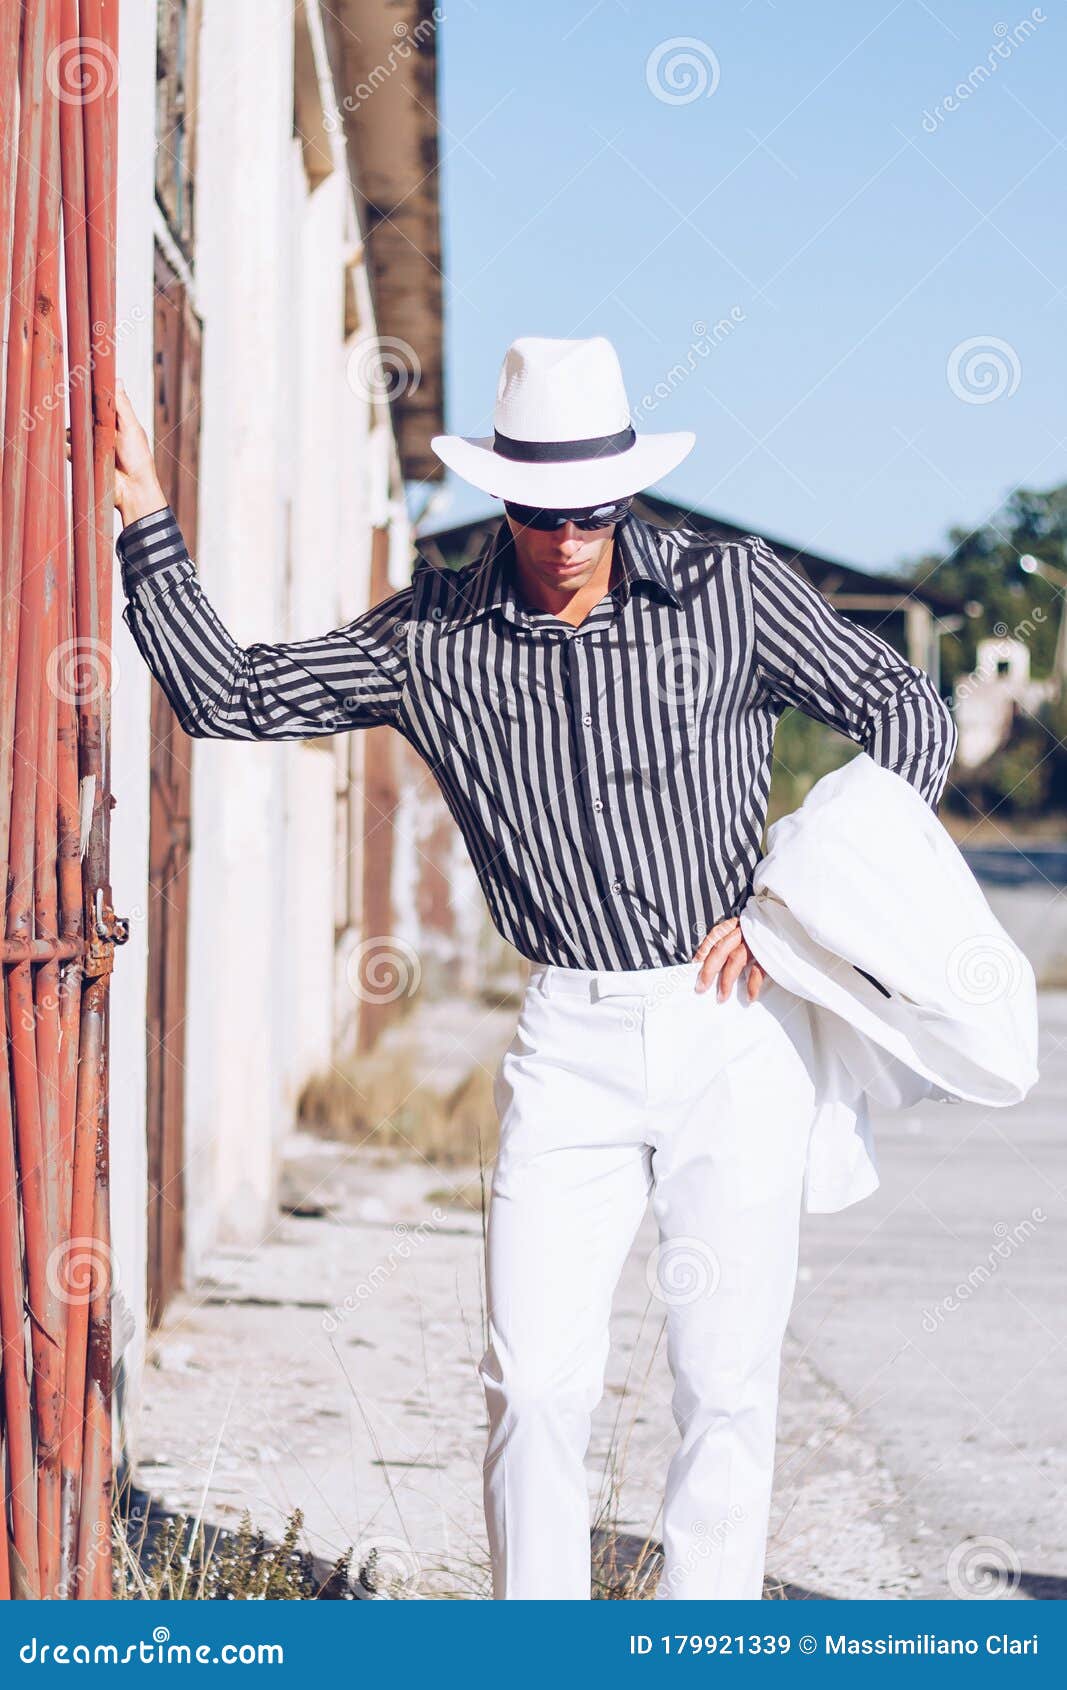 Fancy Fashionable Man with Black Sunglasses , White Hat and White ...